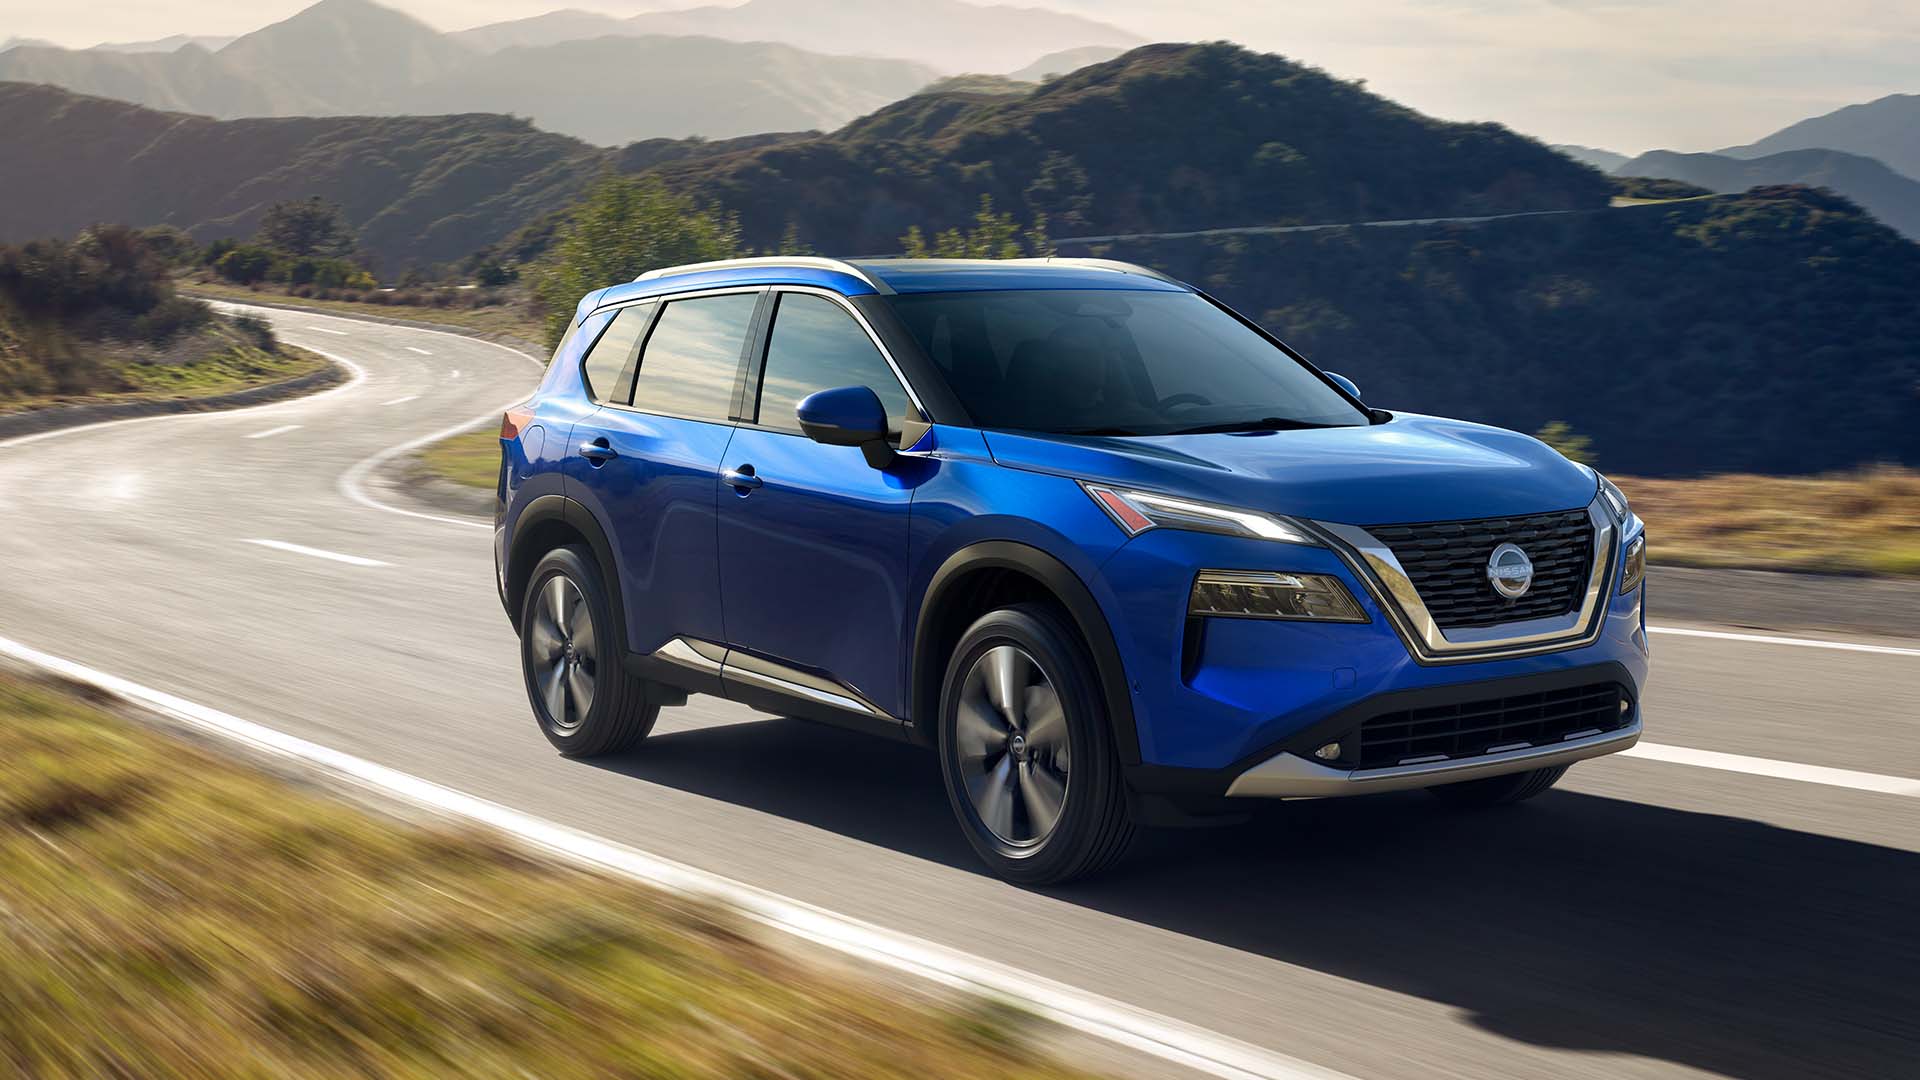 Blue NIssan Rogue driving down a curved road, surrounded by hills and trees